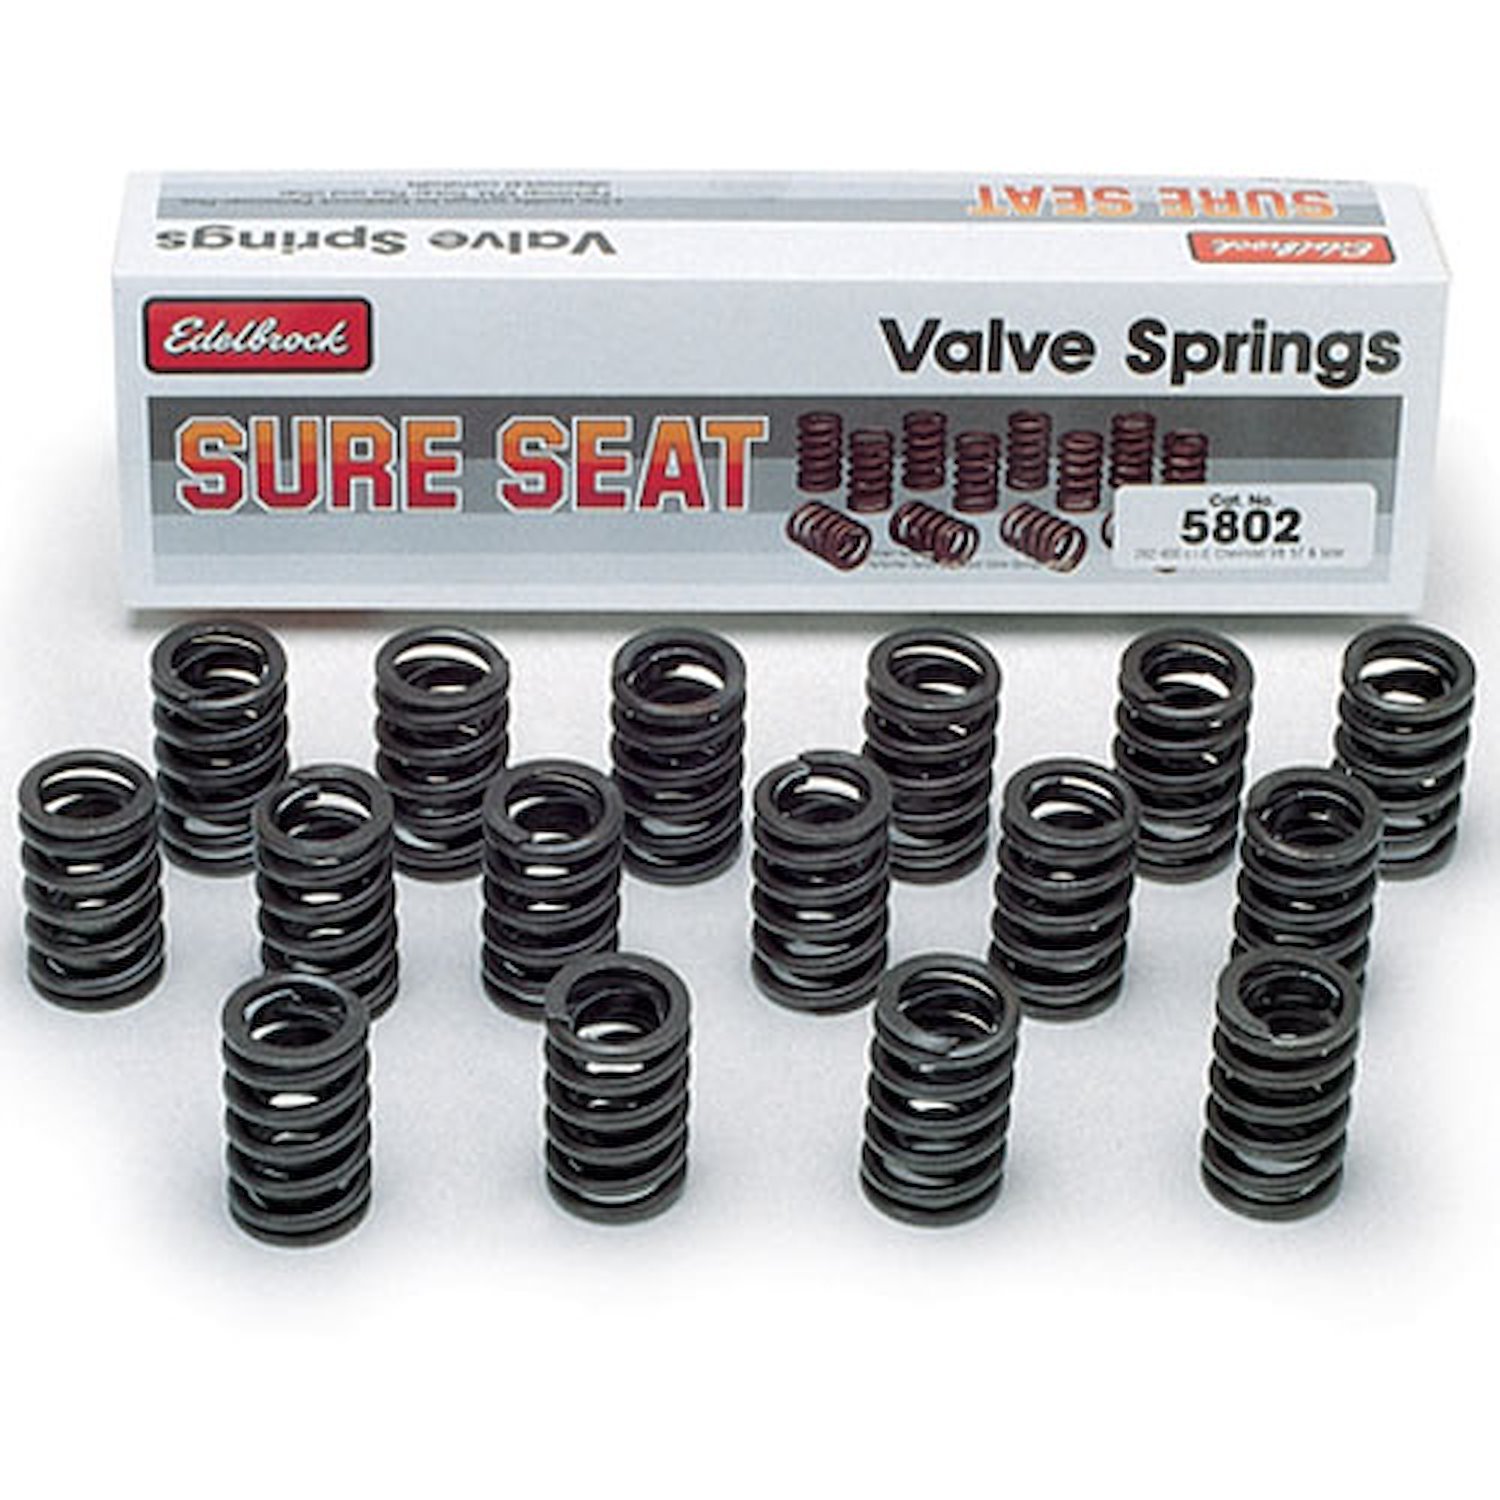 Sure Seat Valve Springs for 1967-84 Oldsmobile 330-455 OE Cast Iron Head